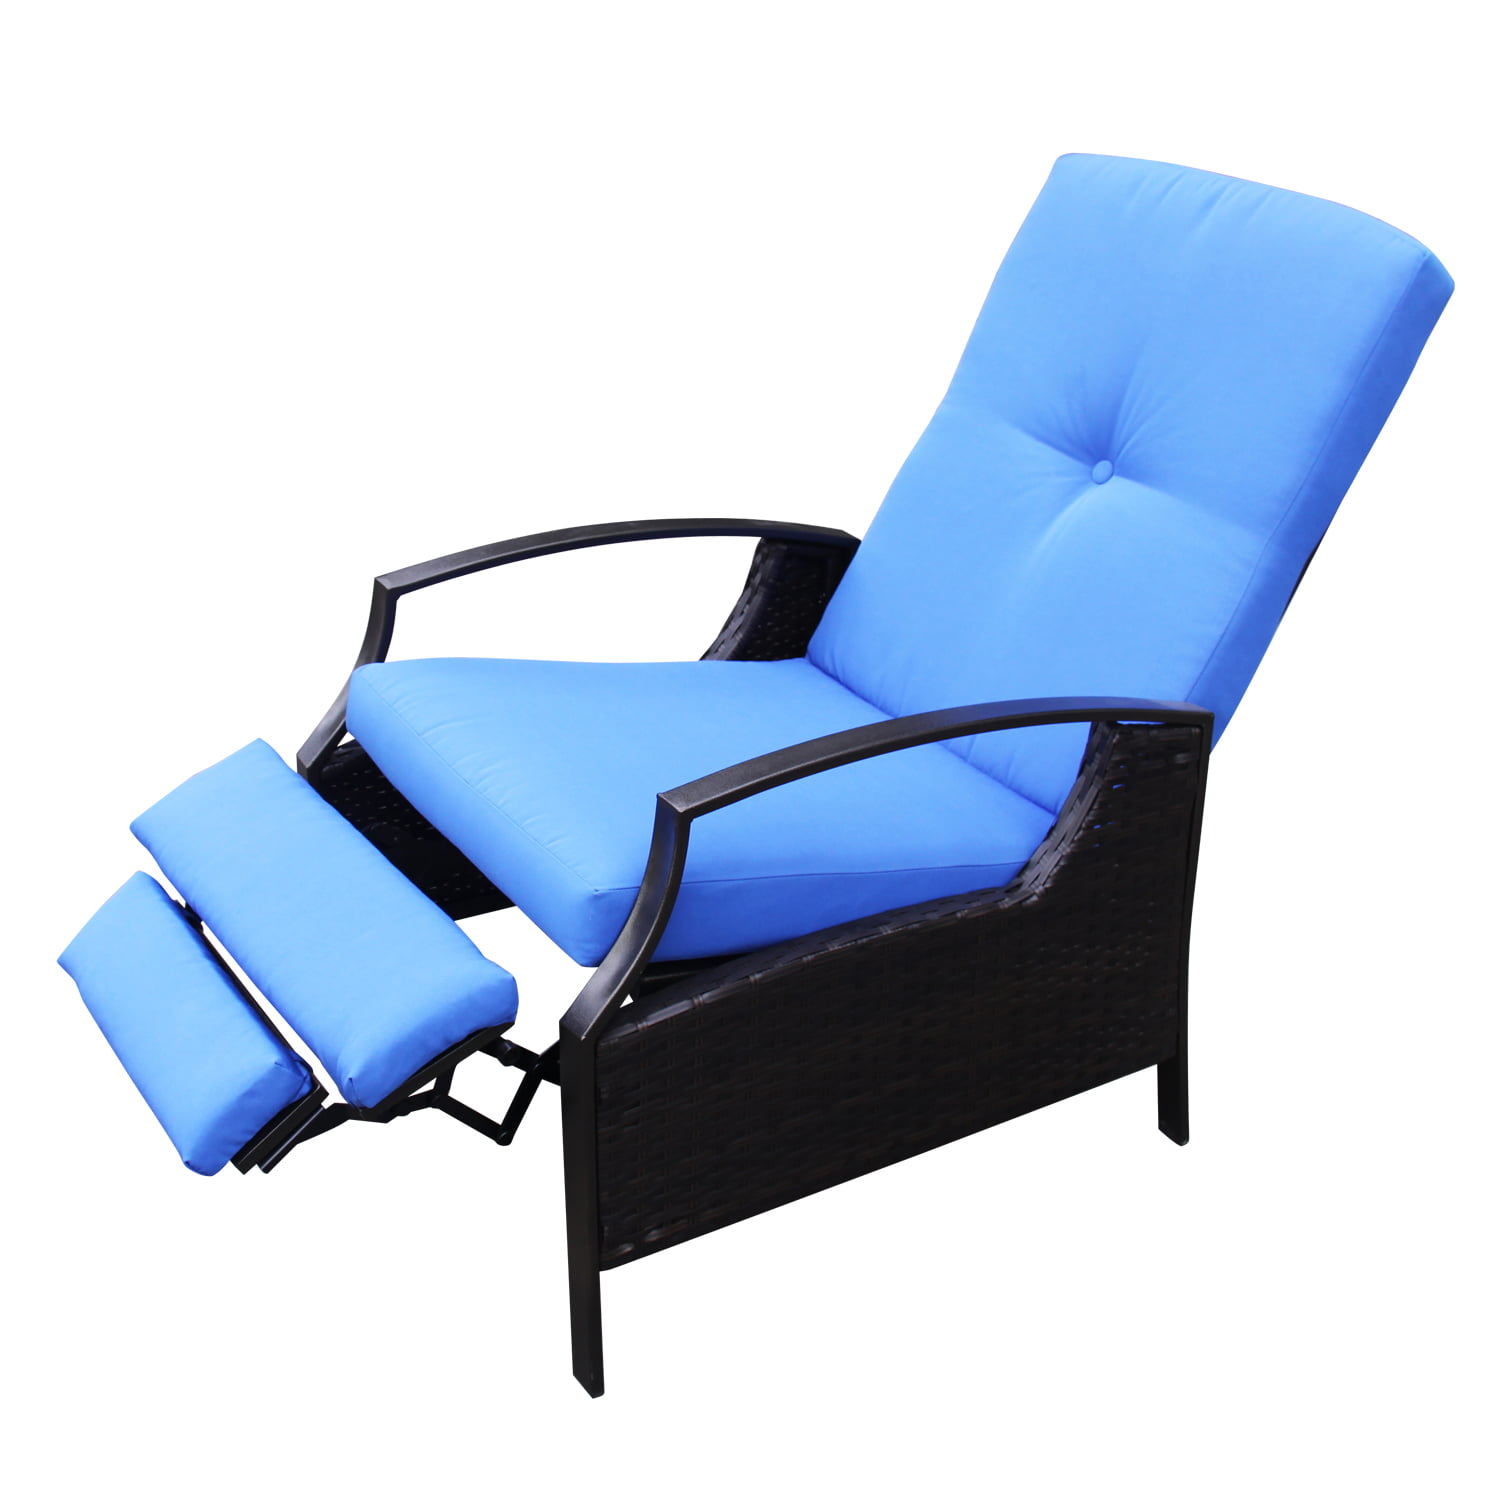 Outsunny Outdoor Rattan Recliner Chair, Outsunny Outdoor Rattan Recliner Chair With Cushion